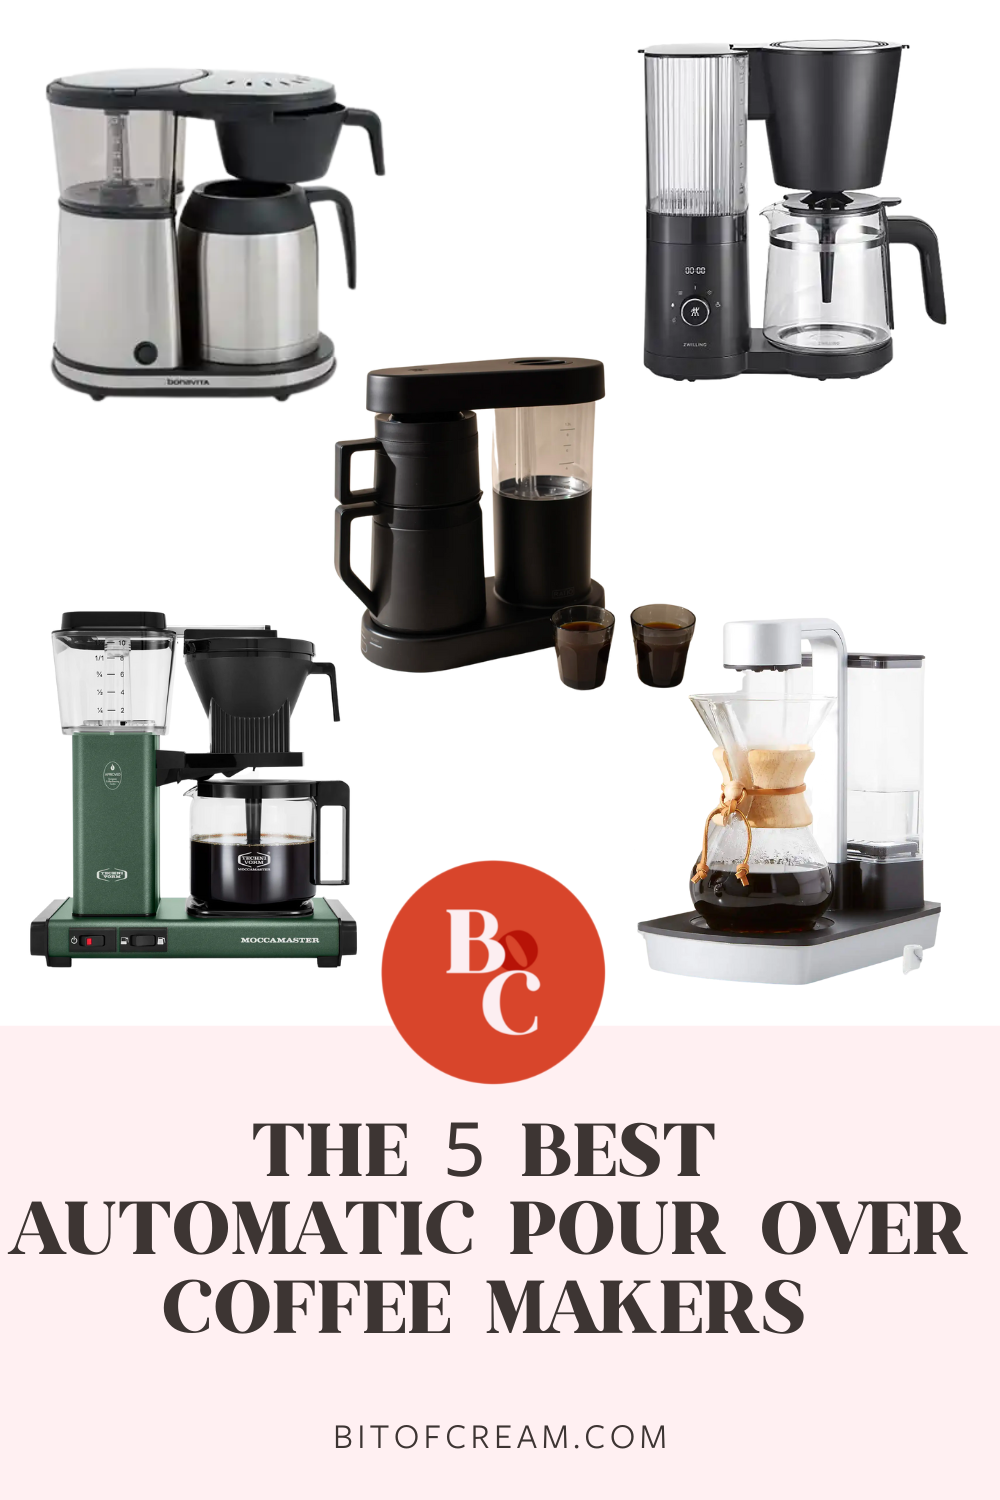 The 5 Best Automatic Pour Over Coffee Makers - BIT OF CREAM in 2023